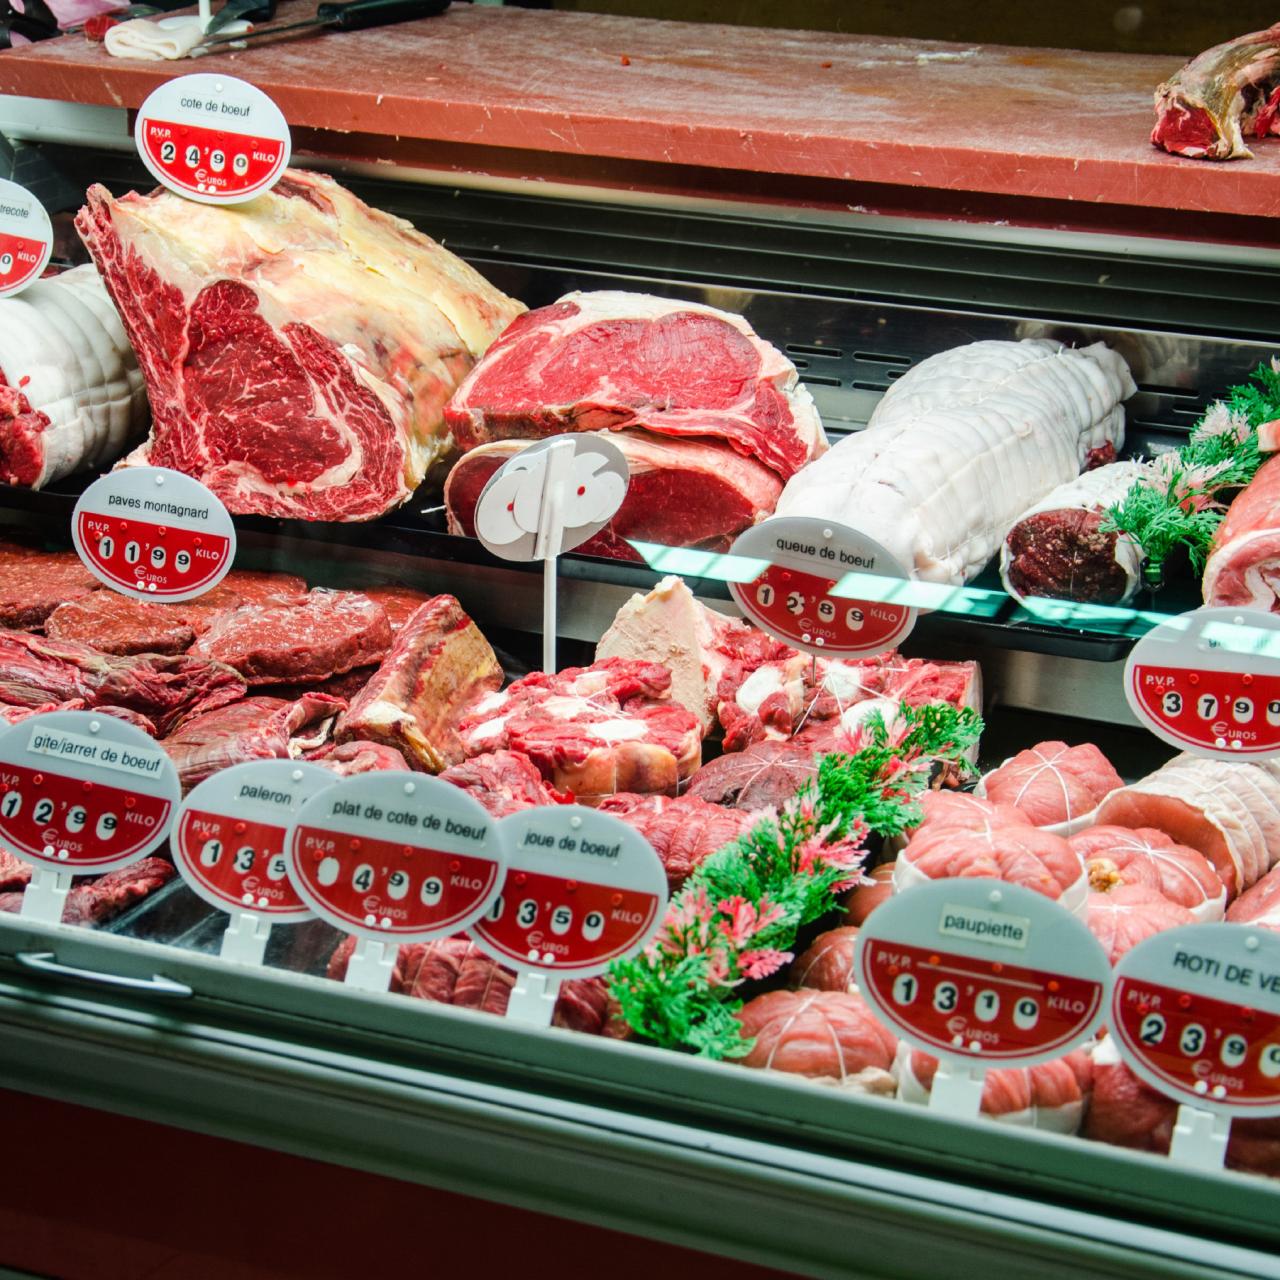 What to Look For When Buying Meat